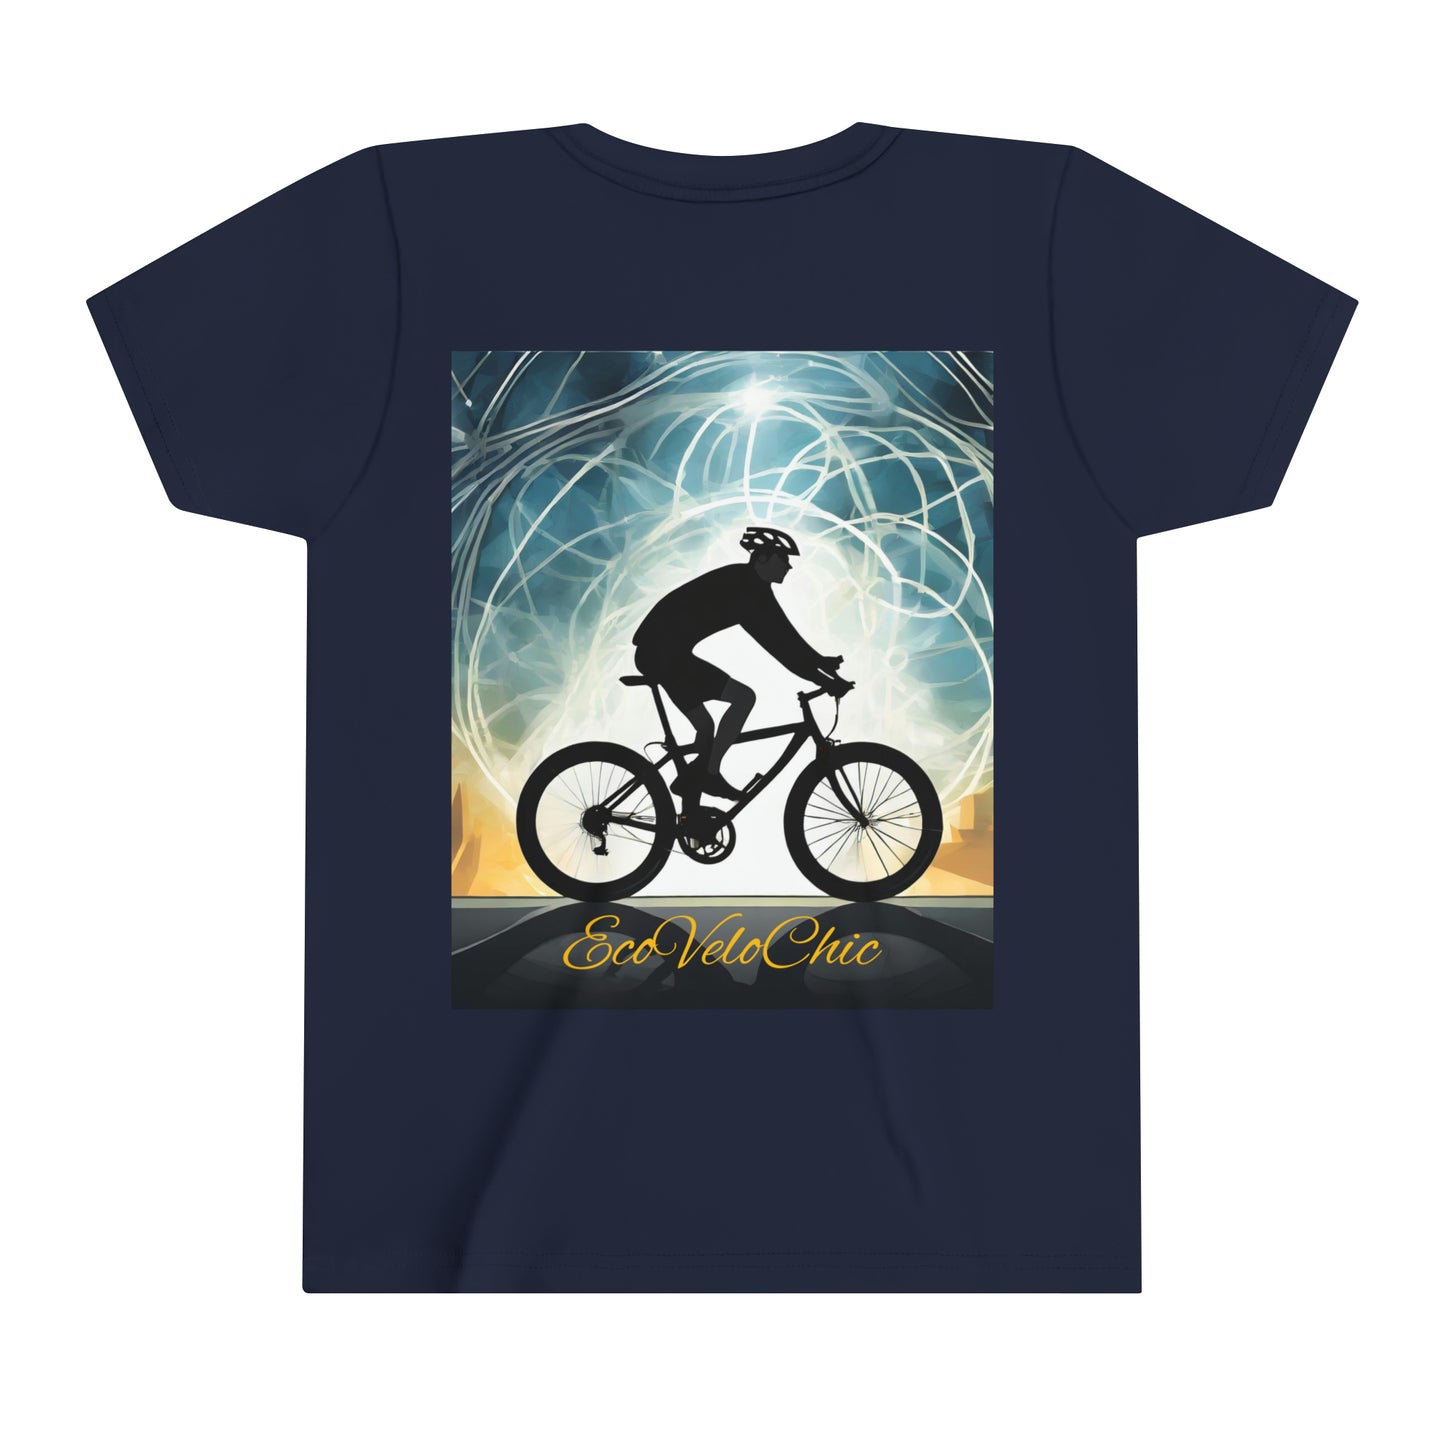 Youth Short Sleeve Tee Eco Velo Chic Electric Bicycle Ebike E bike Kids 5-8 yr. Unisex Collection